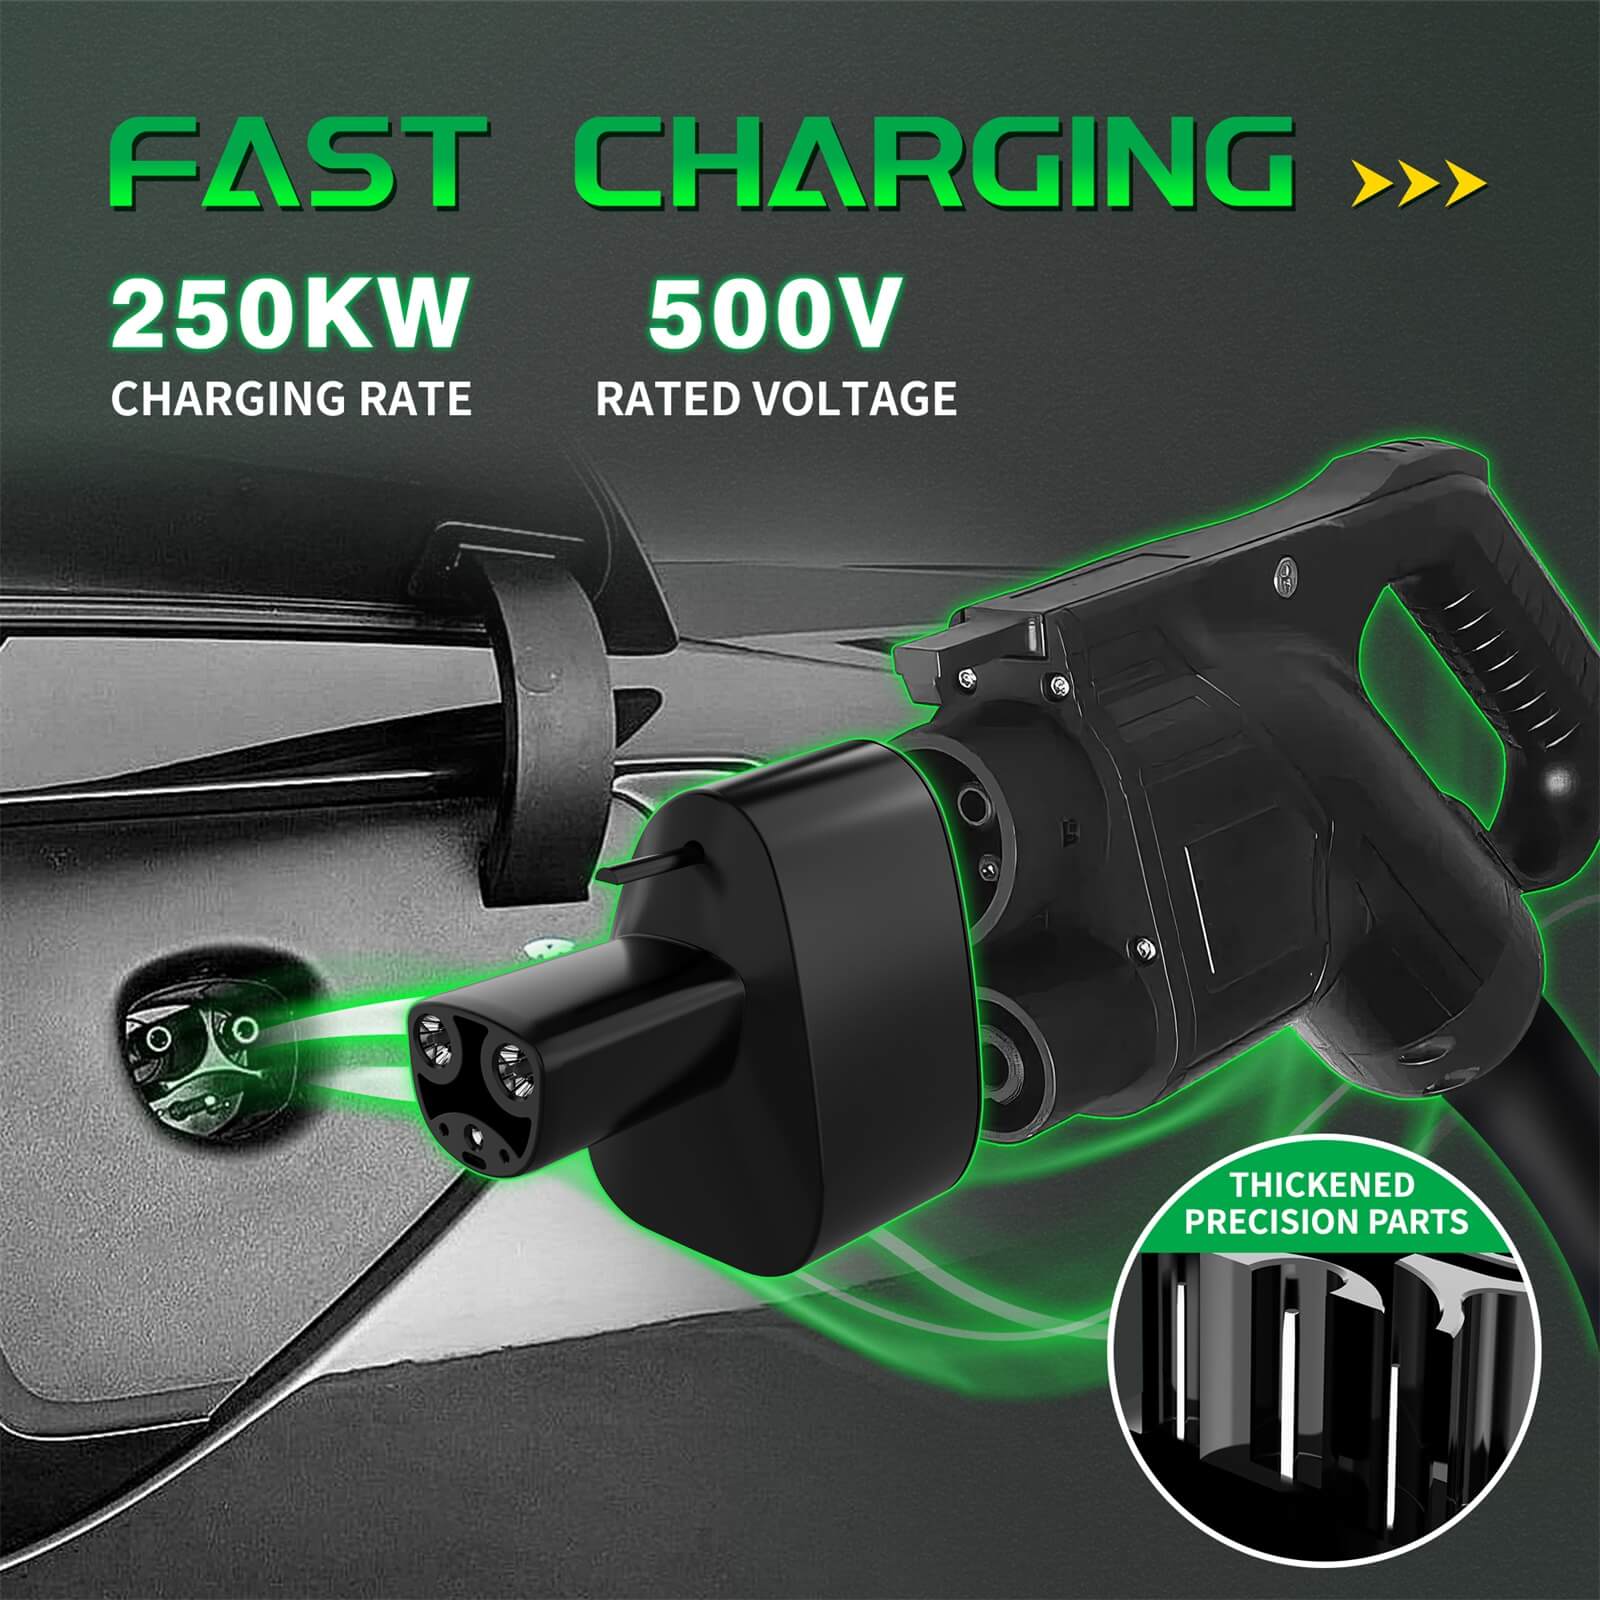 CCS Charger Adapter Compatible with Tesla Model 3,Y, S and X - 250KW DC Fast Charging